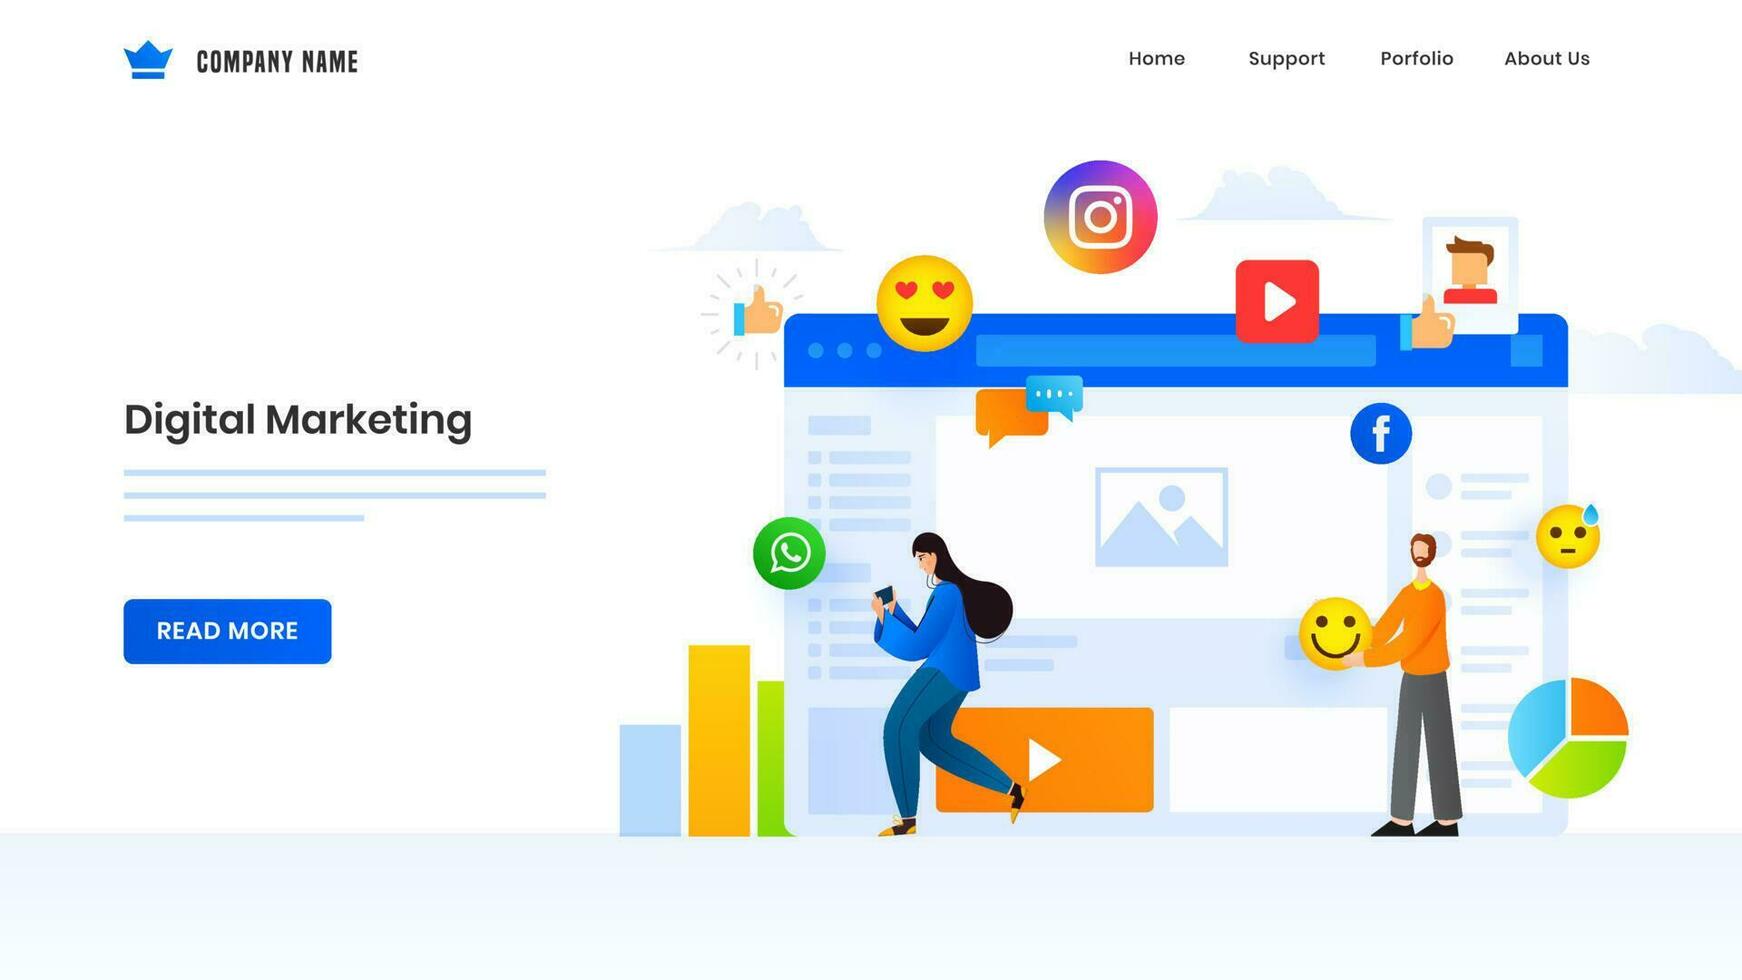 Digital Marketing concept based landing page design with man and woman using online social media elements. vector